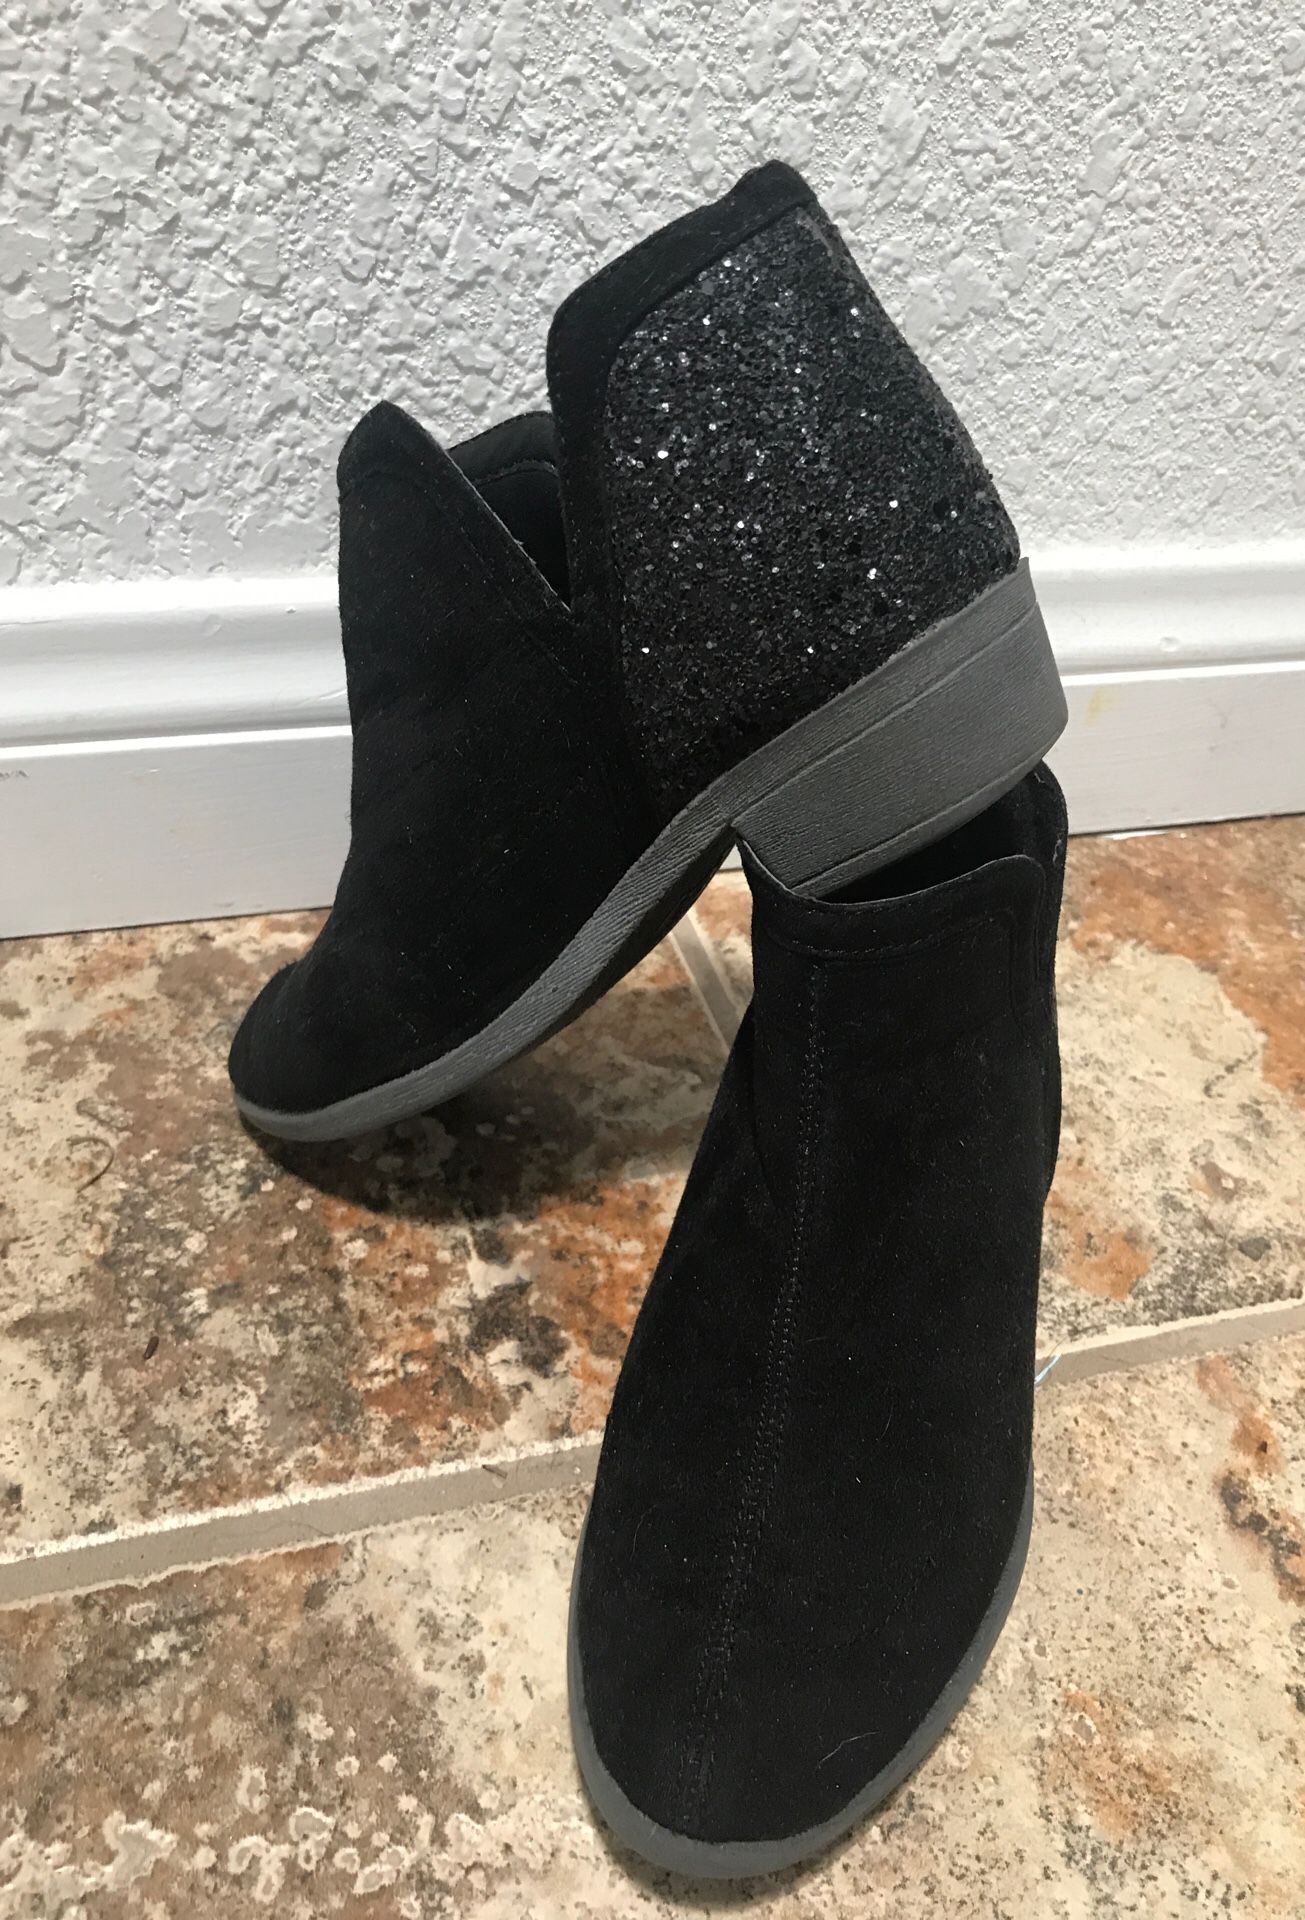 Justice girls boots size 13 5$